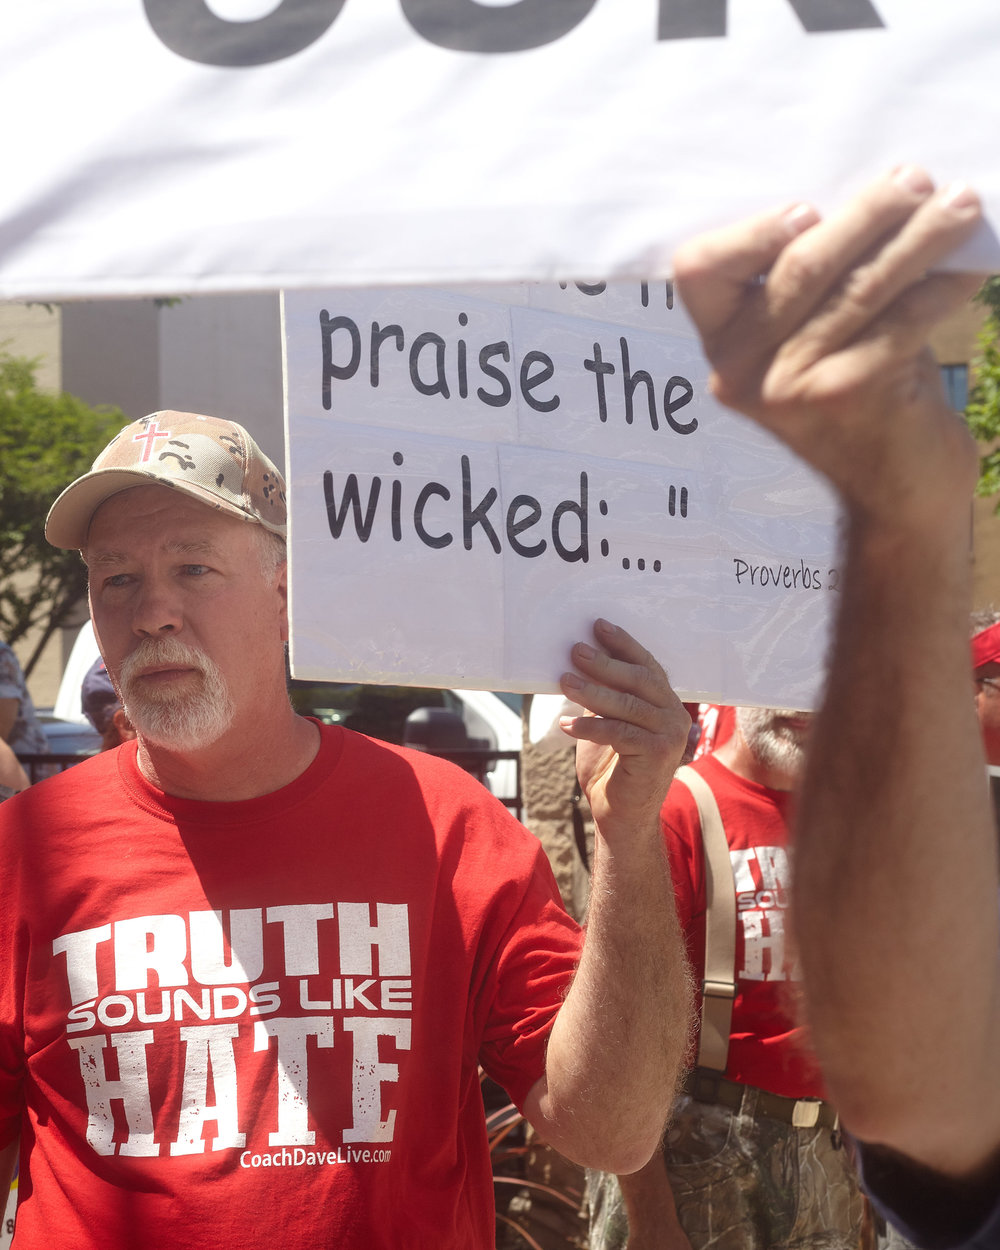 A counter protester wearing a shirt that states "Truth Sounds Like Hate" holds a sign with a biblical passage.